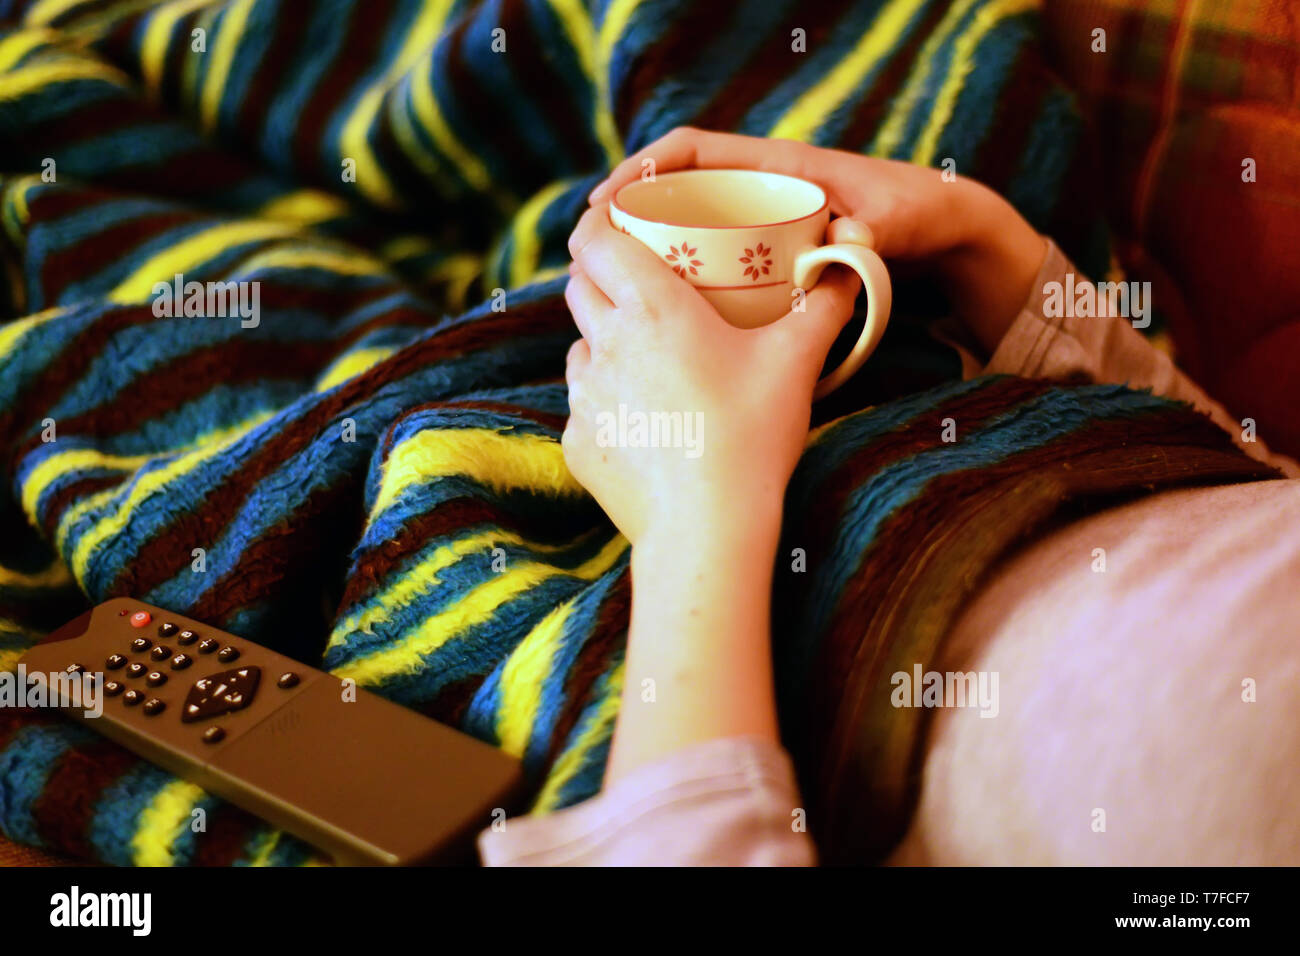 Chilling at home under the blanket with remote control and tea mug in hand Stock Photo